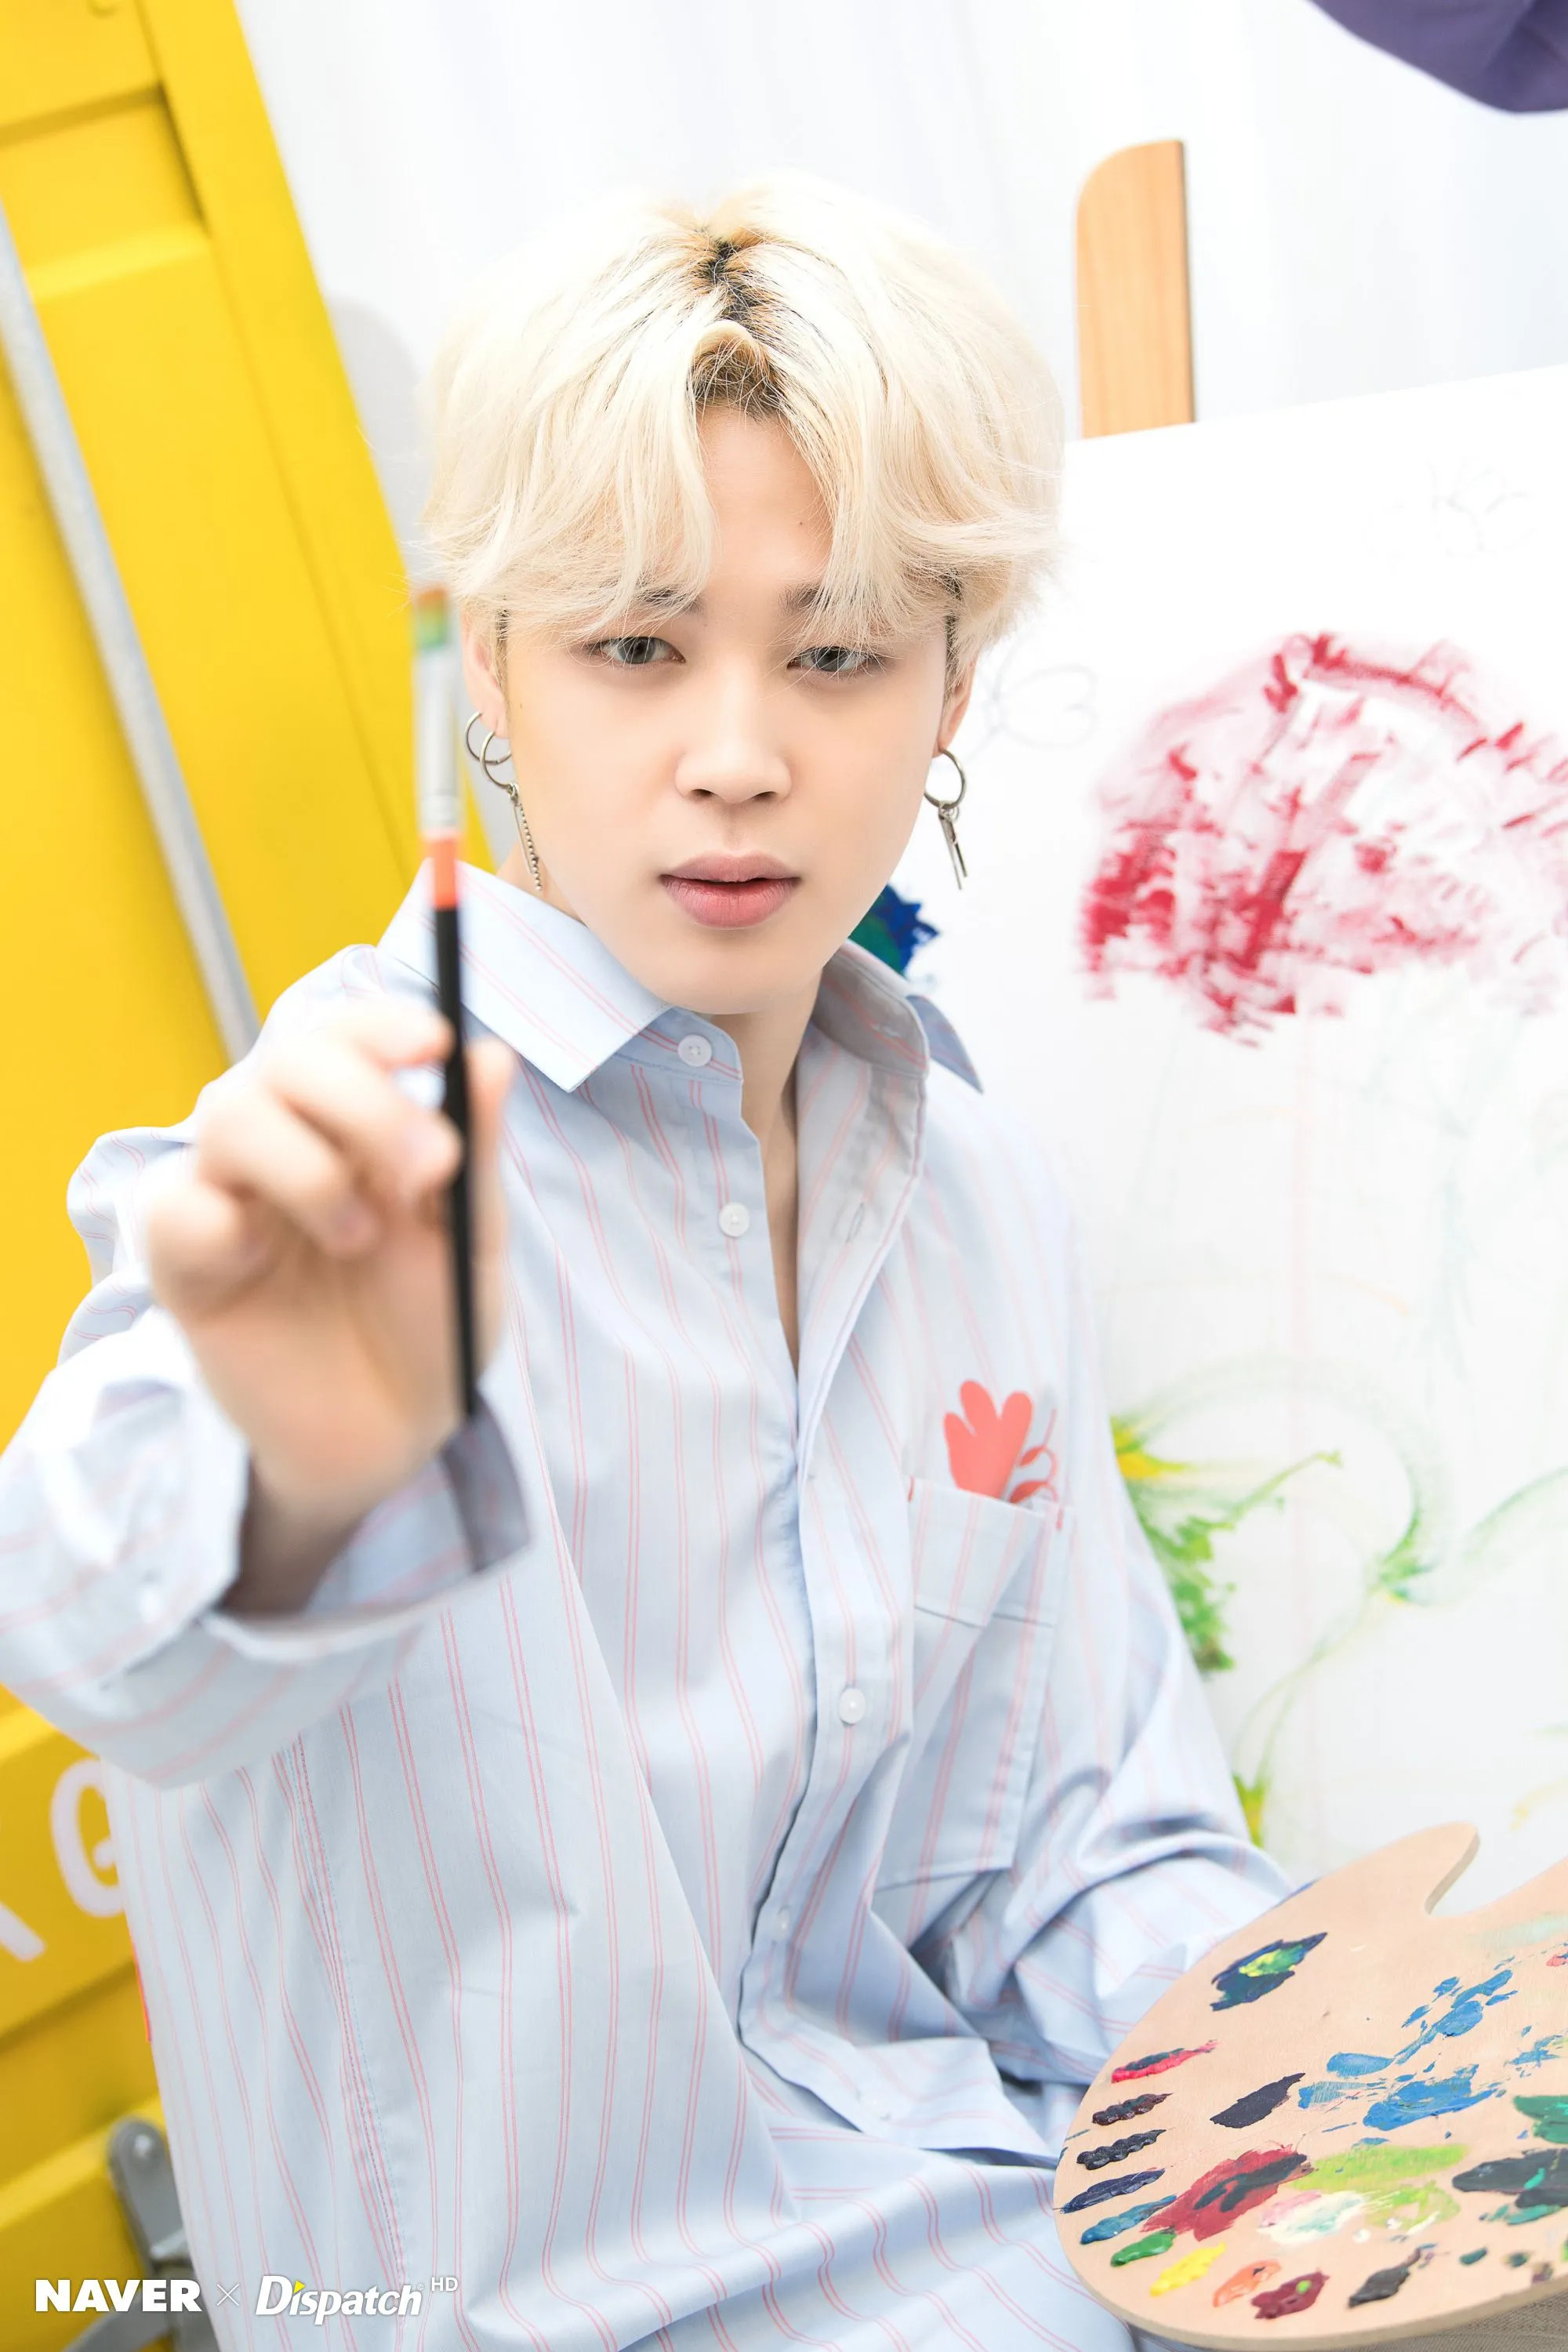 It's a perfect gift for White Valentine's Day” 'Vogue' BTS Jimin x